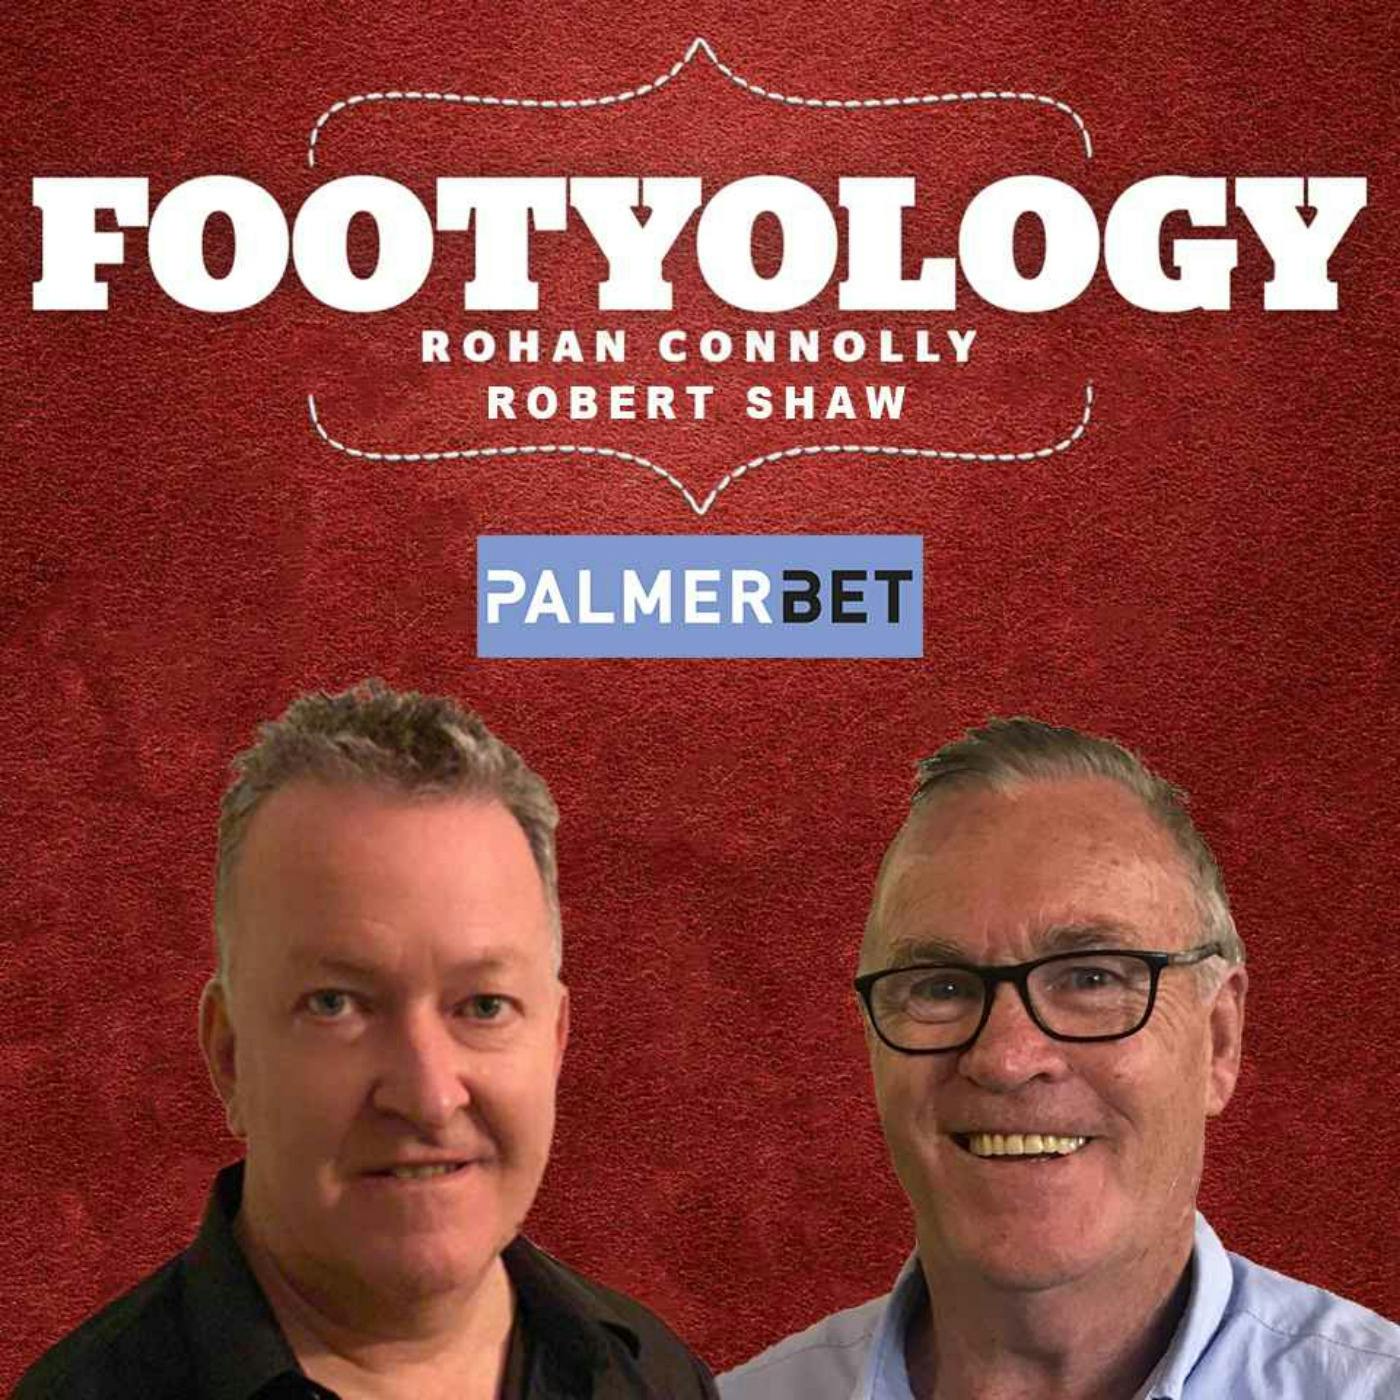 Footyology Podcast - March 22nd 2022